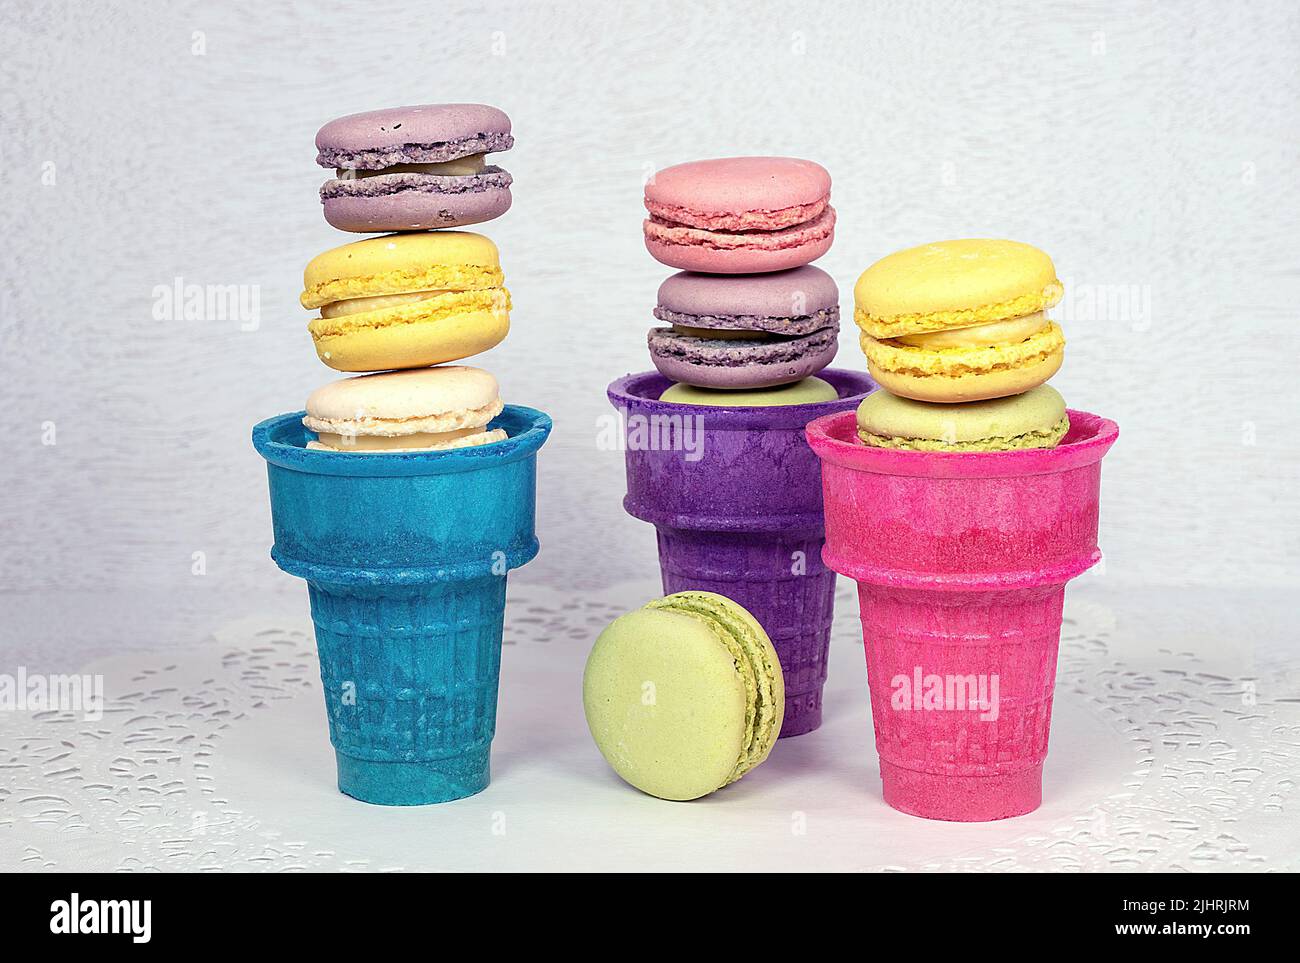 French macaroons stacked in colorful ice cream cups Stock Photo